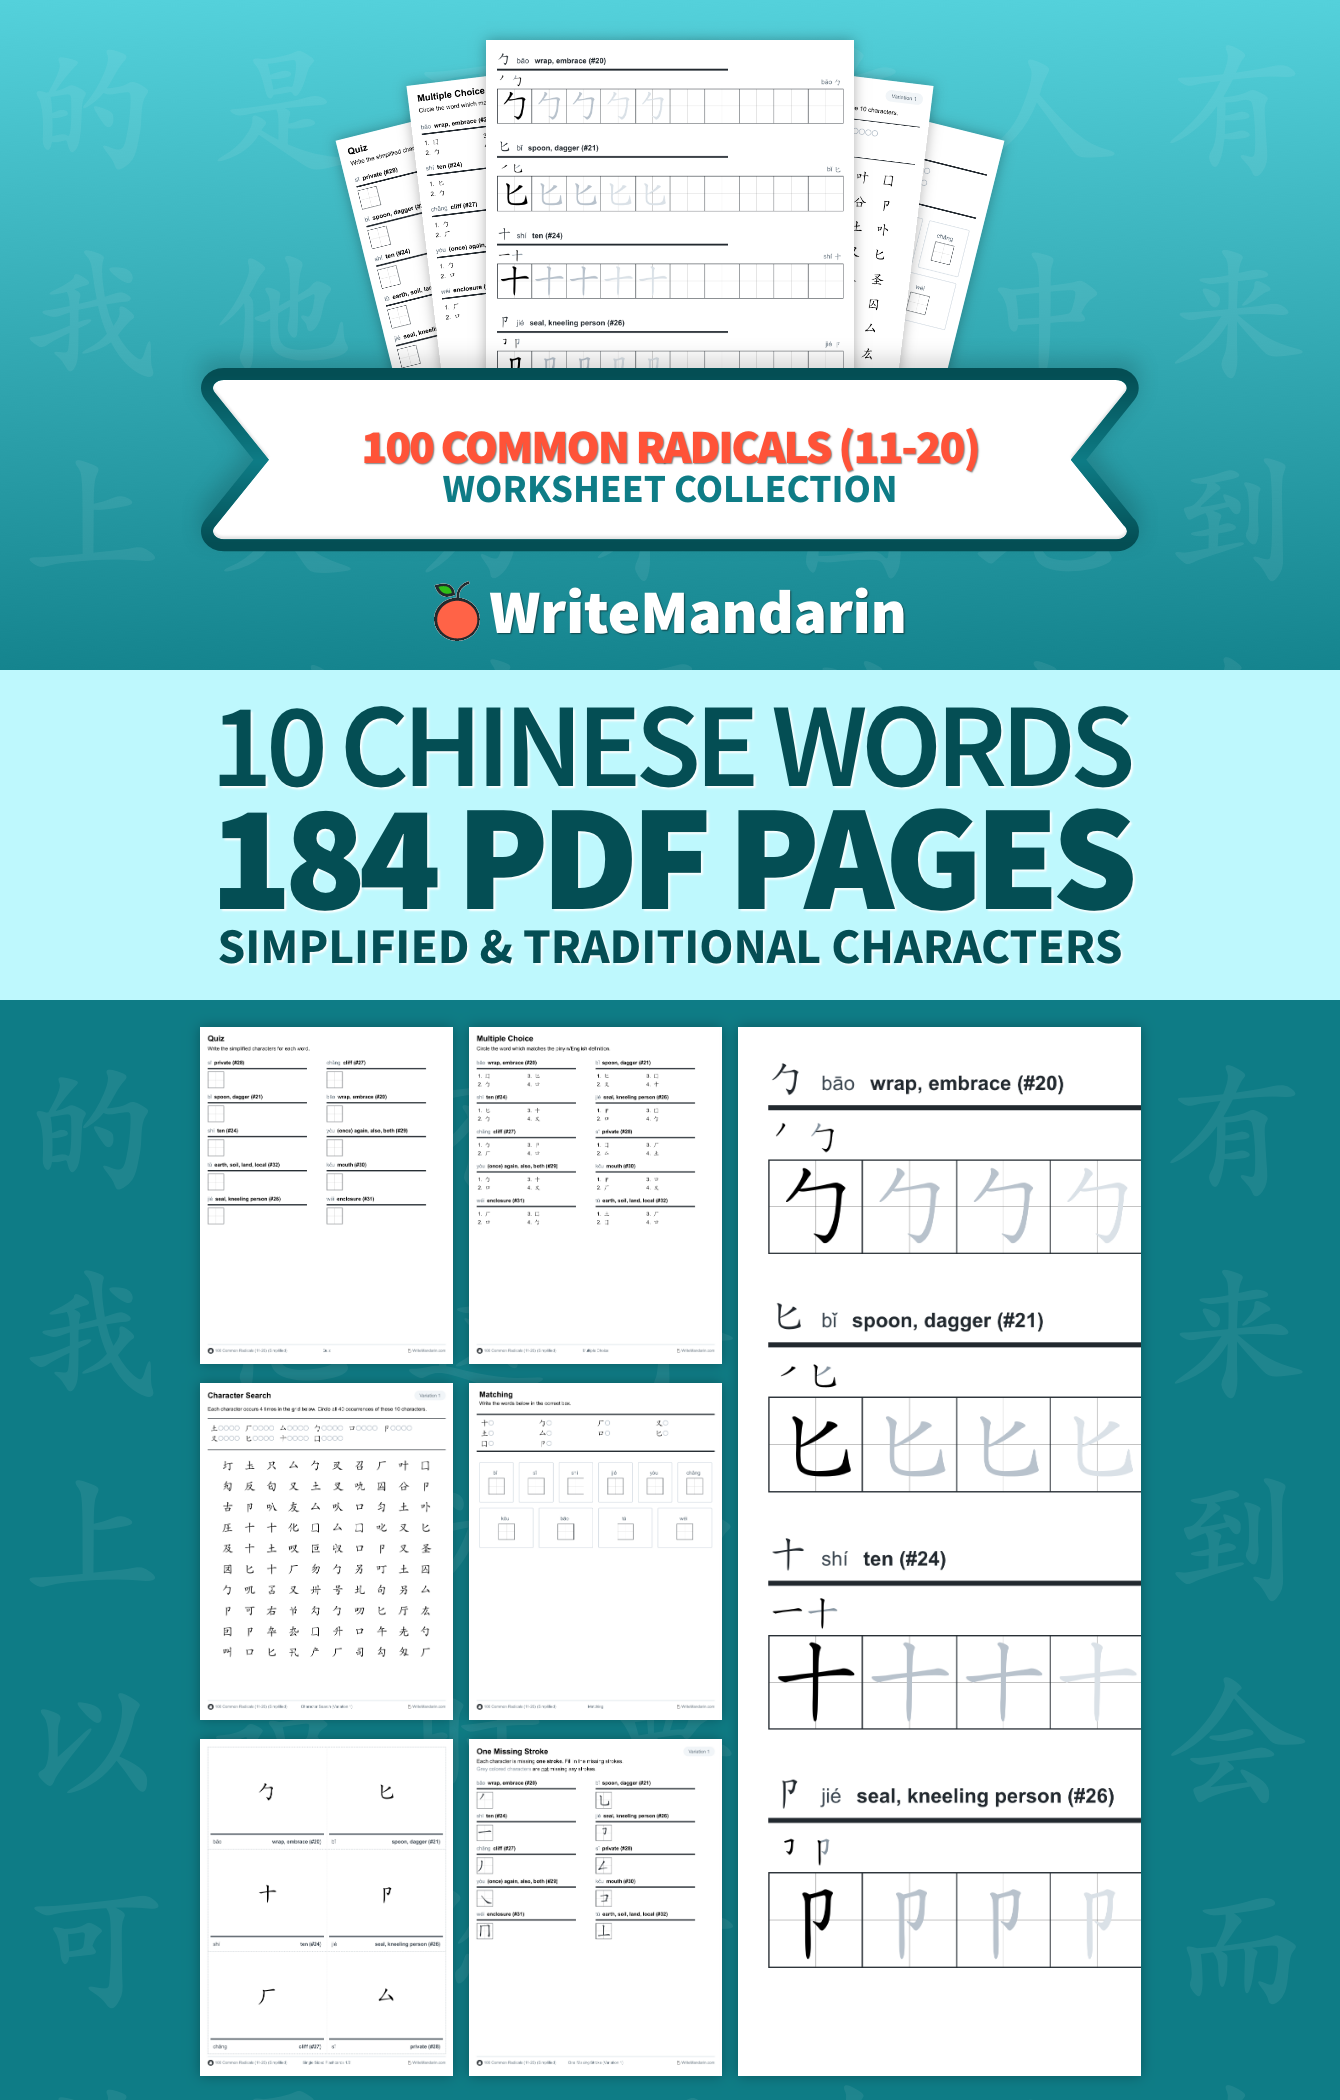 Preview image of 100 Common Radicals (11-20) worksheet collection